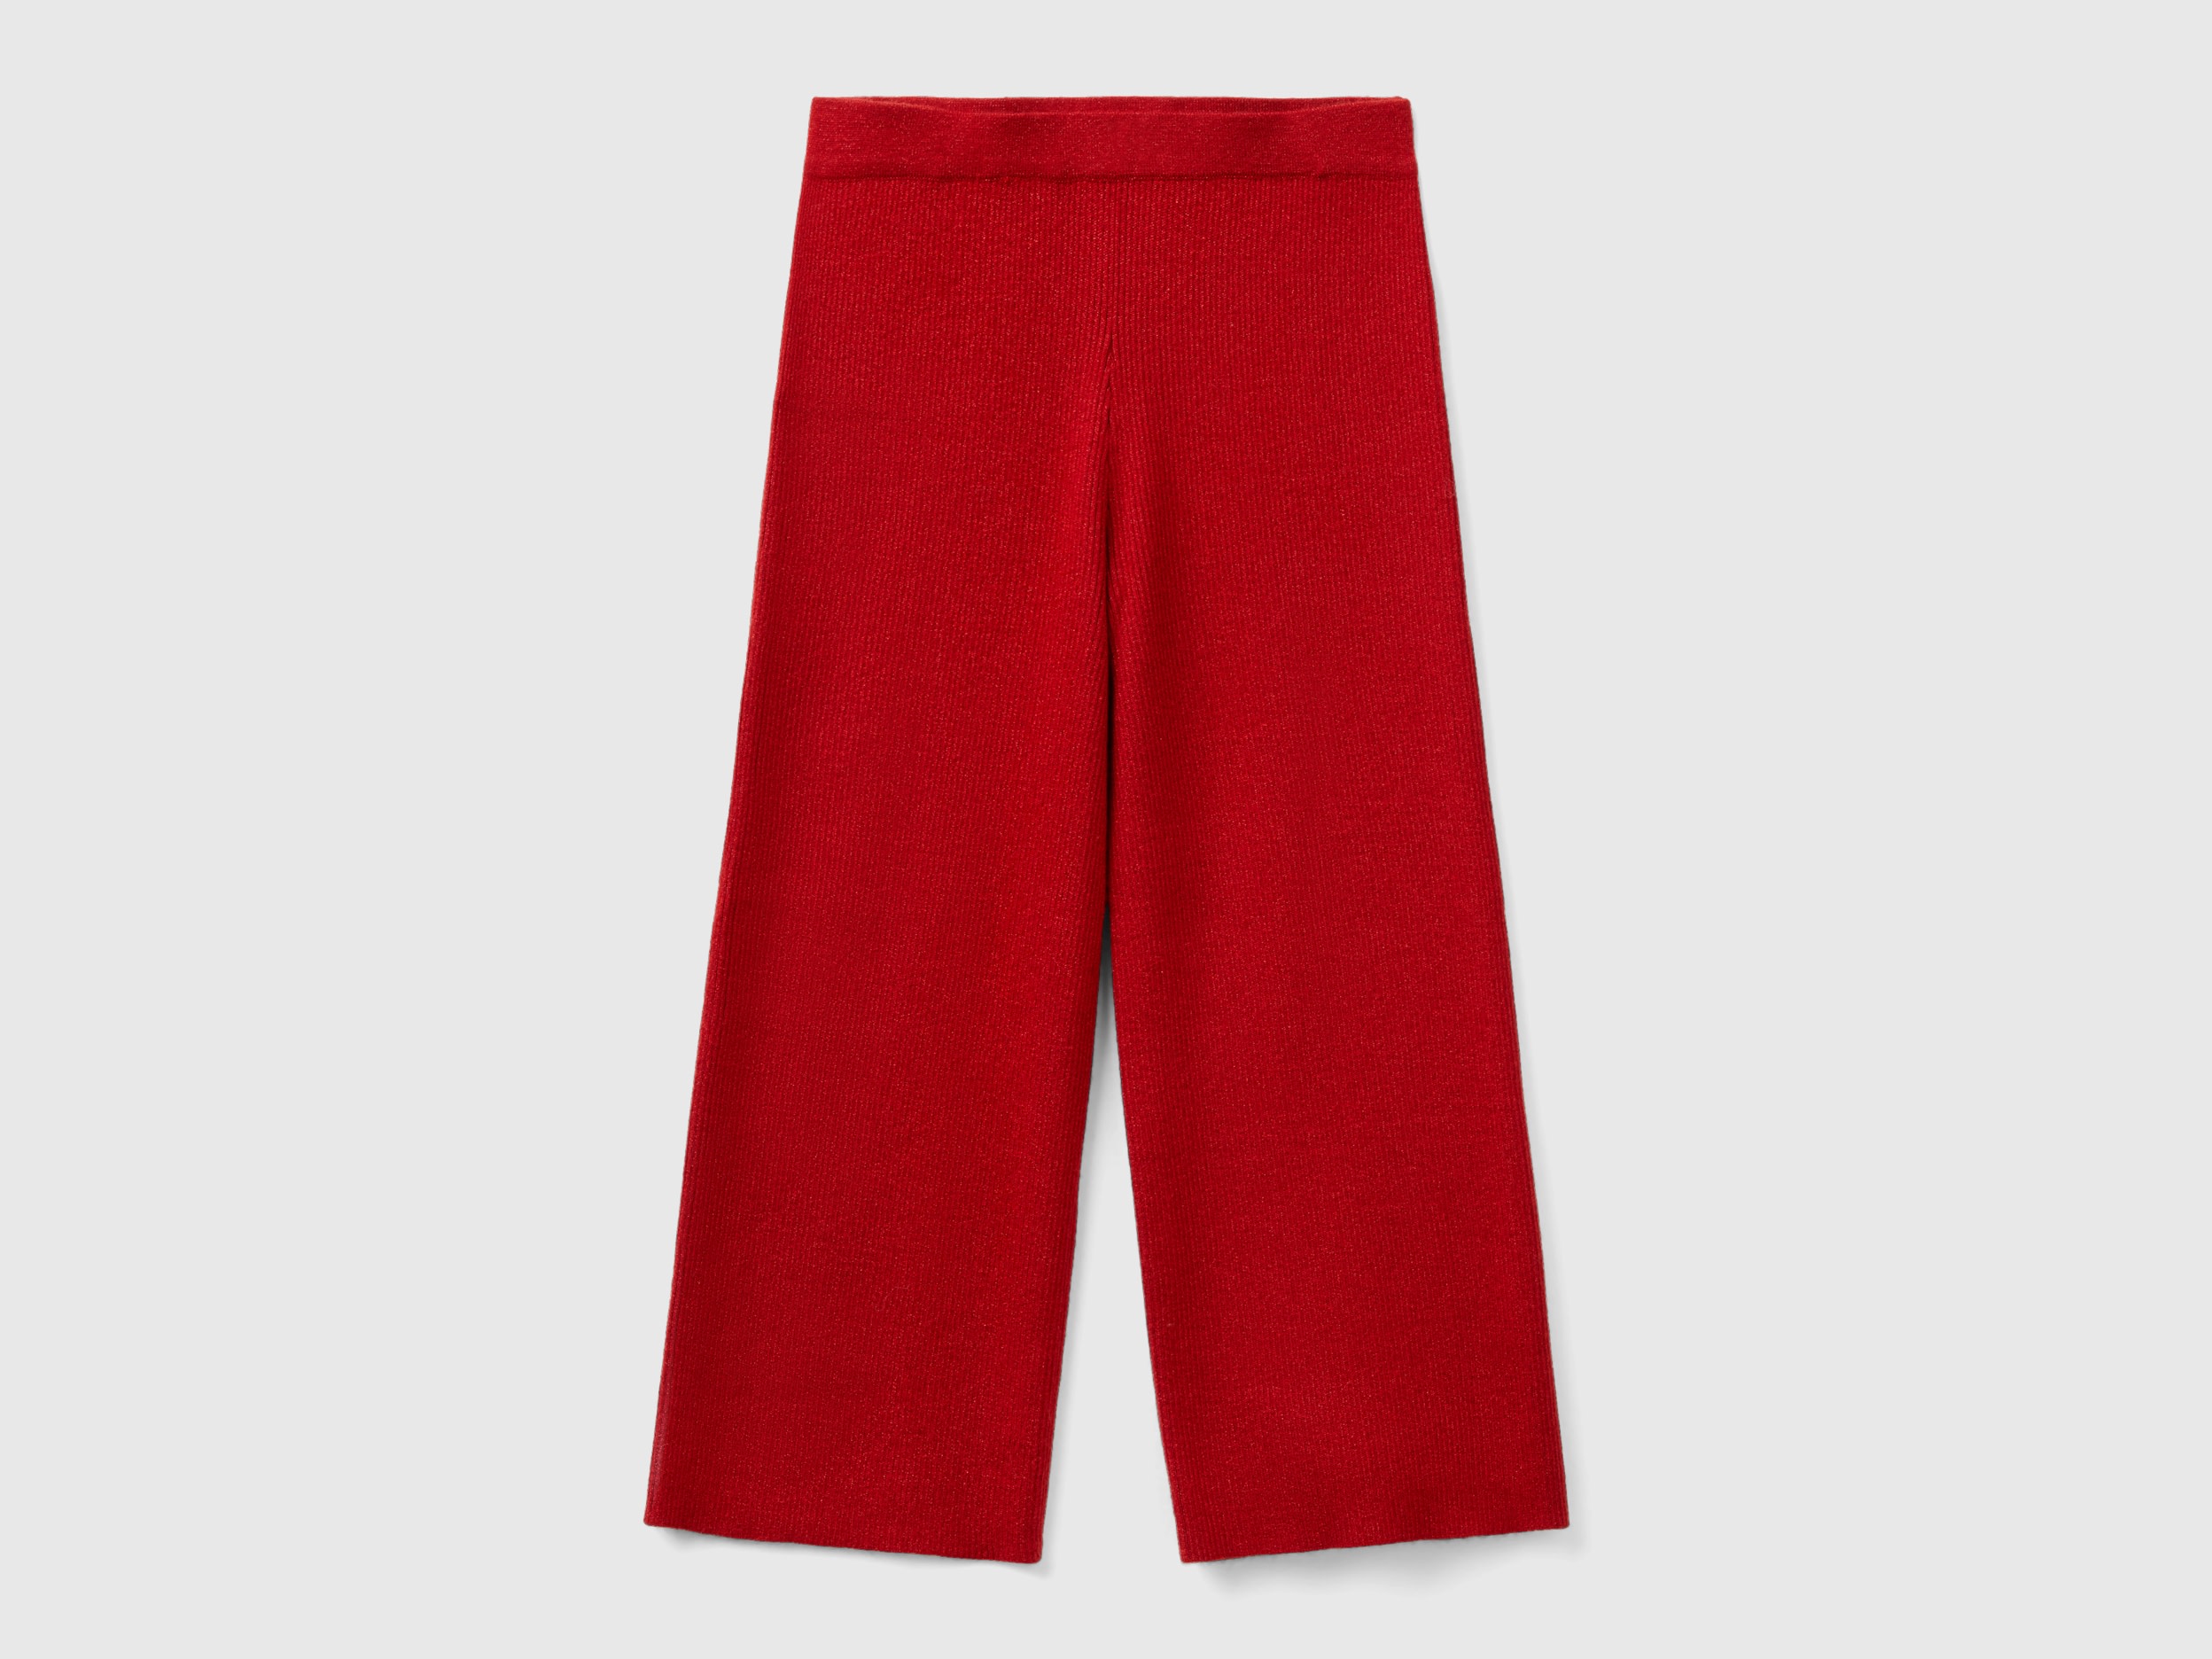 Benetton, Knit Pants With Lurex, size S, Red, Kids